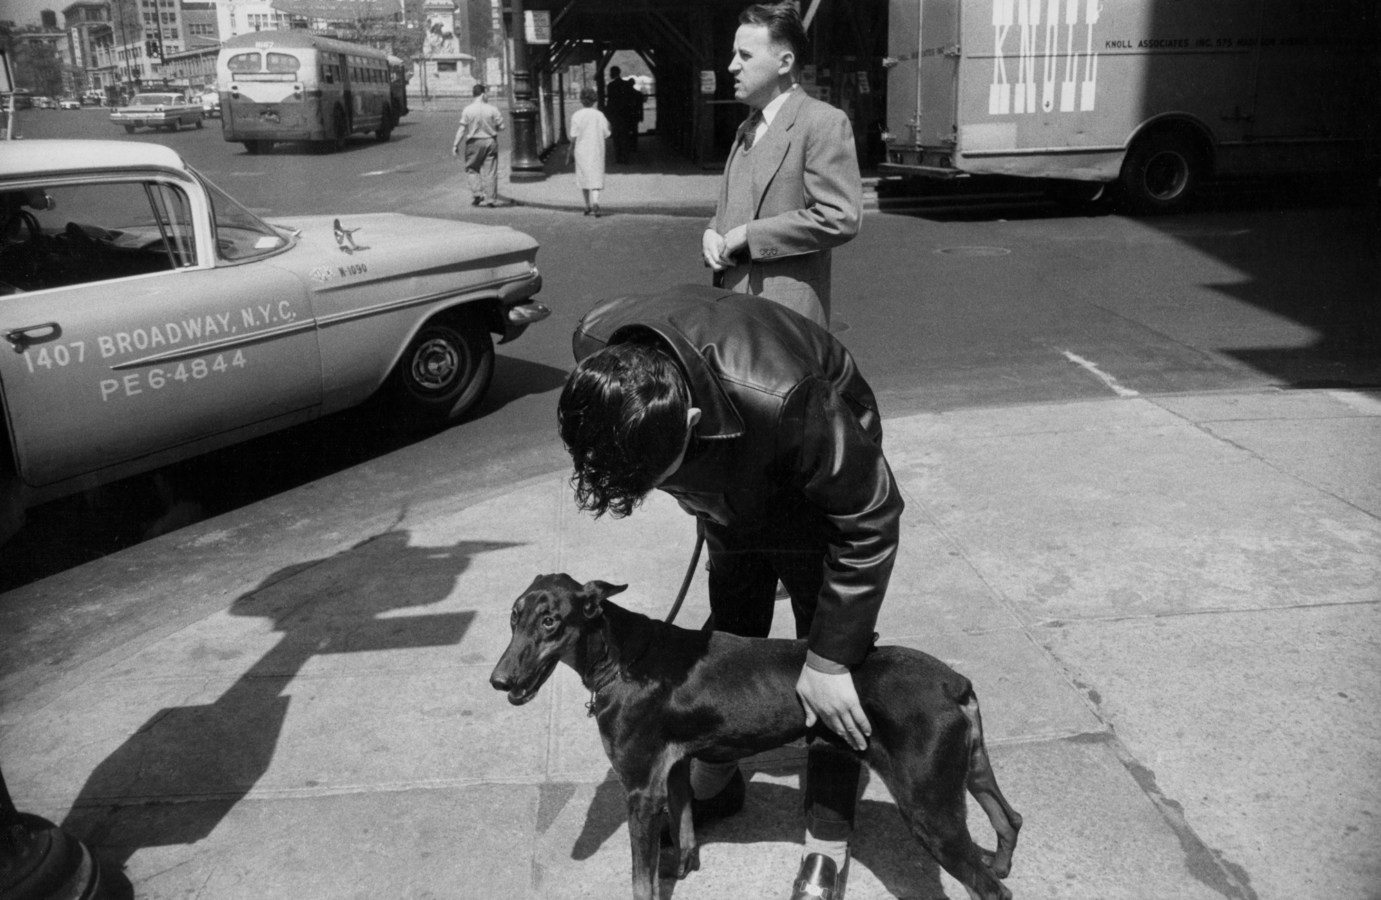 Black and white photograph of two men on the street, one leaning over a medium-sized black dog